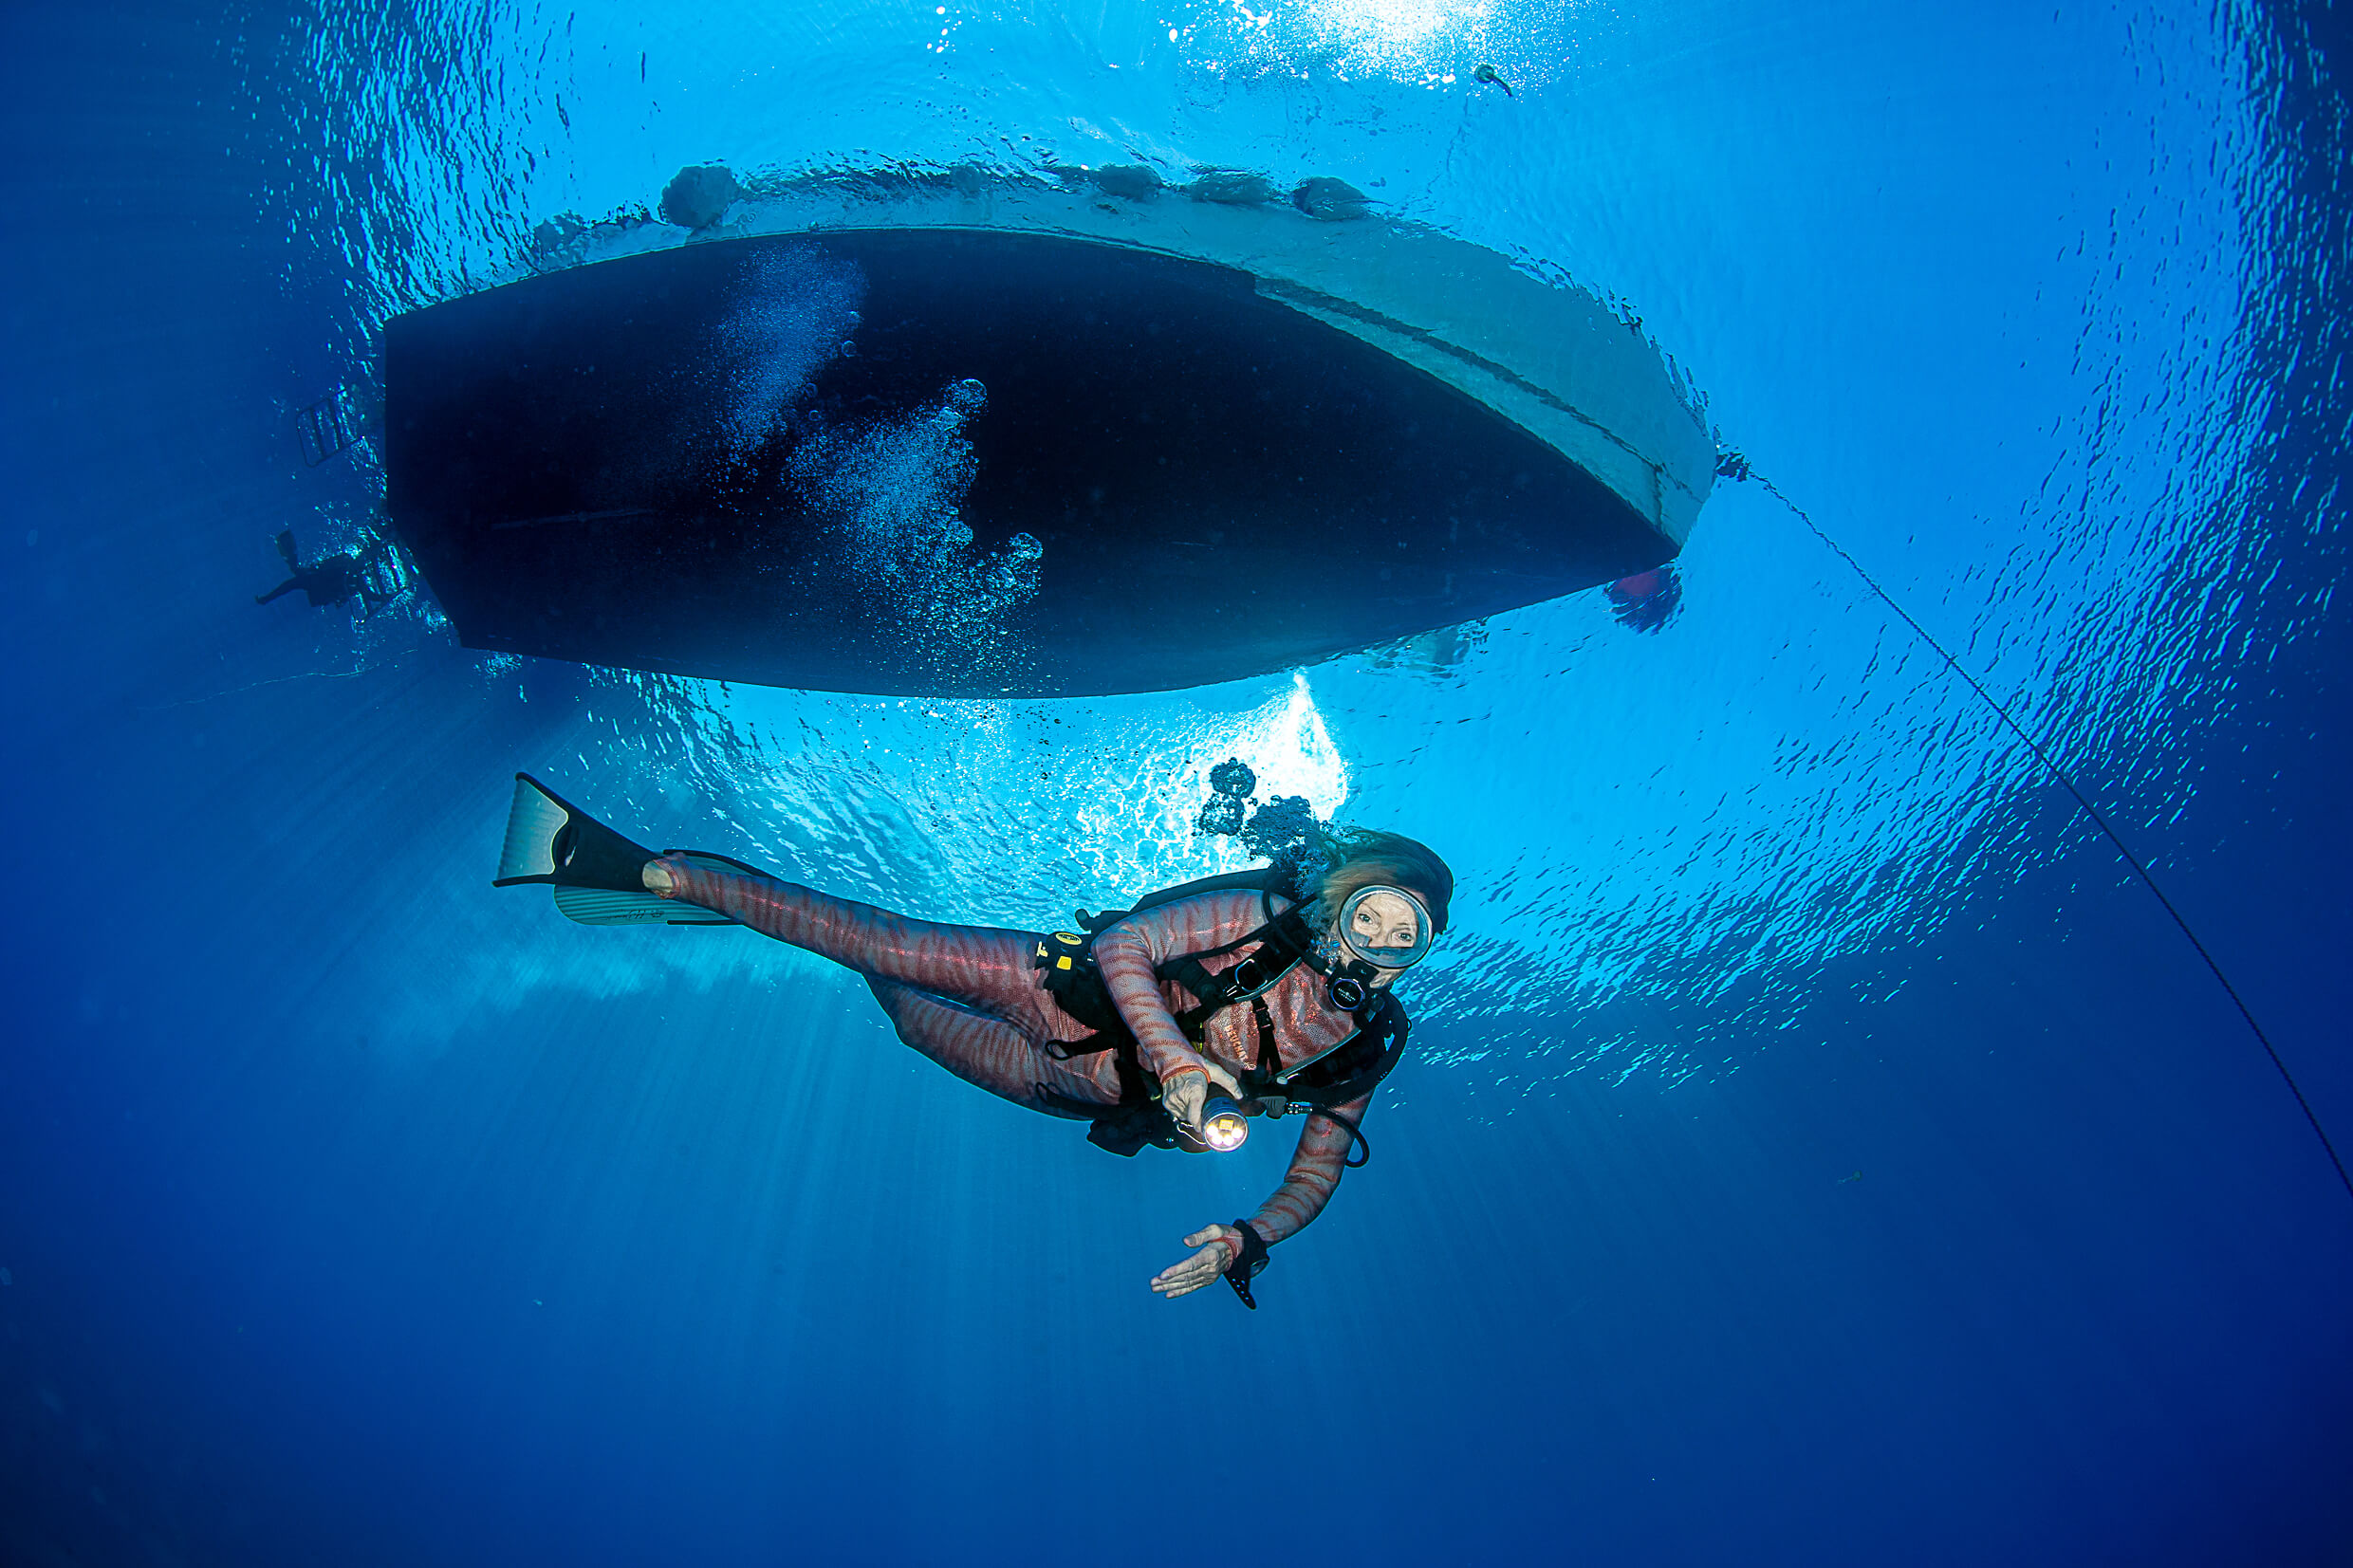 Under the diving boat